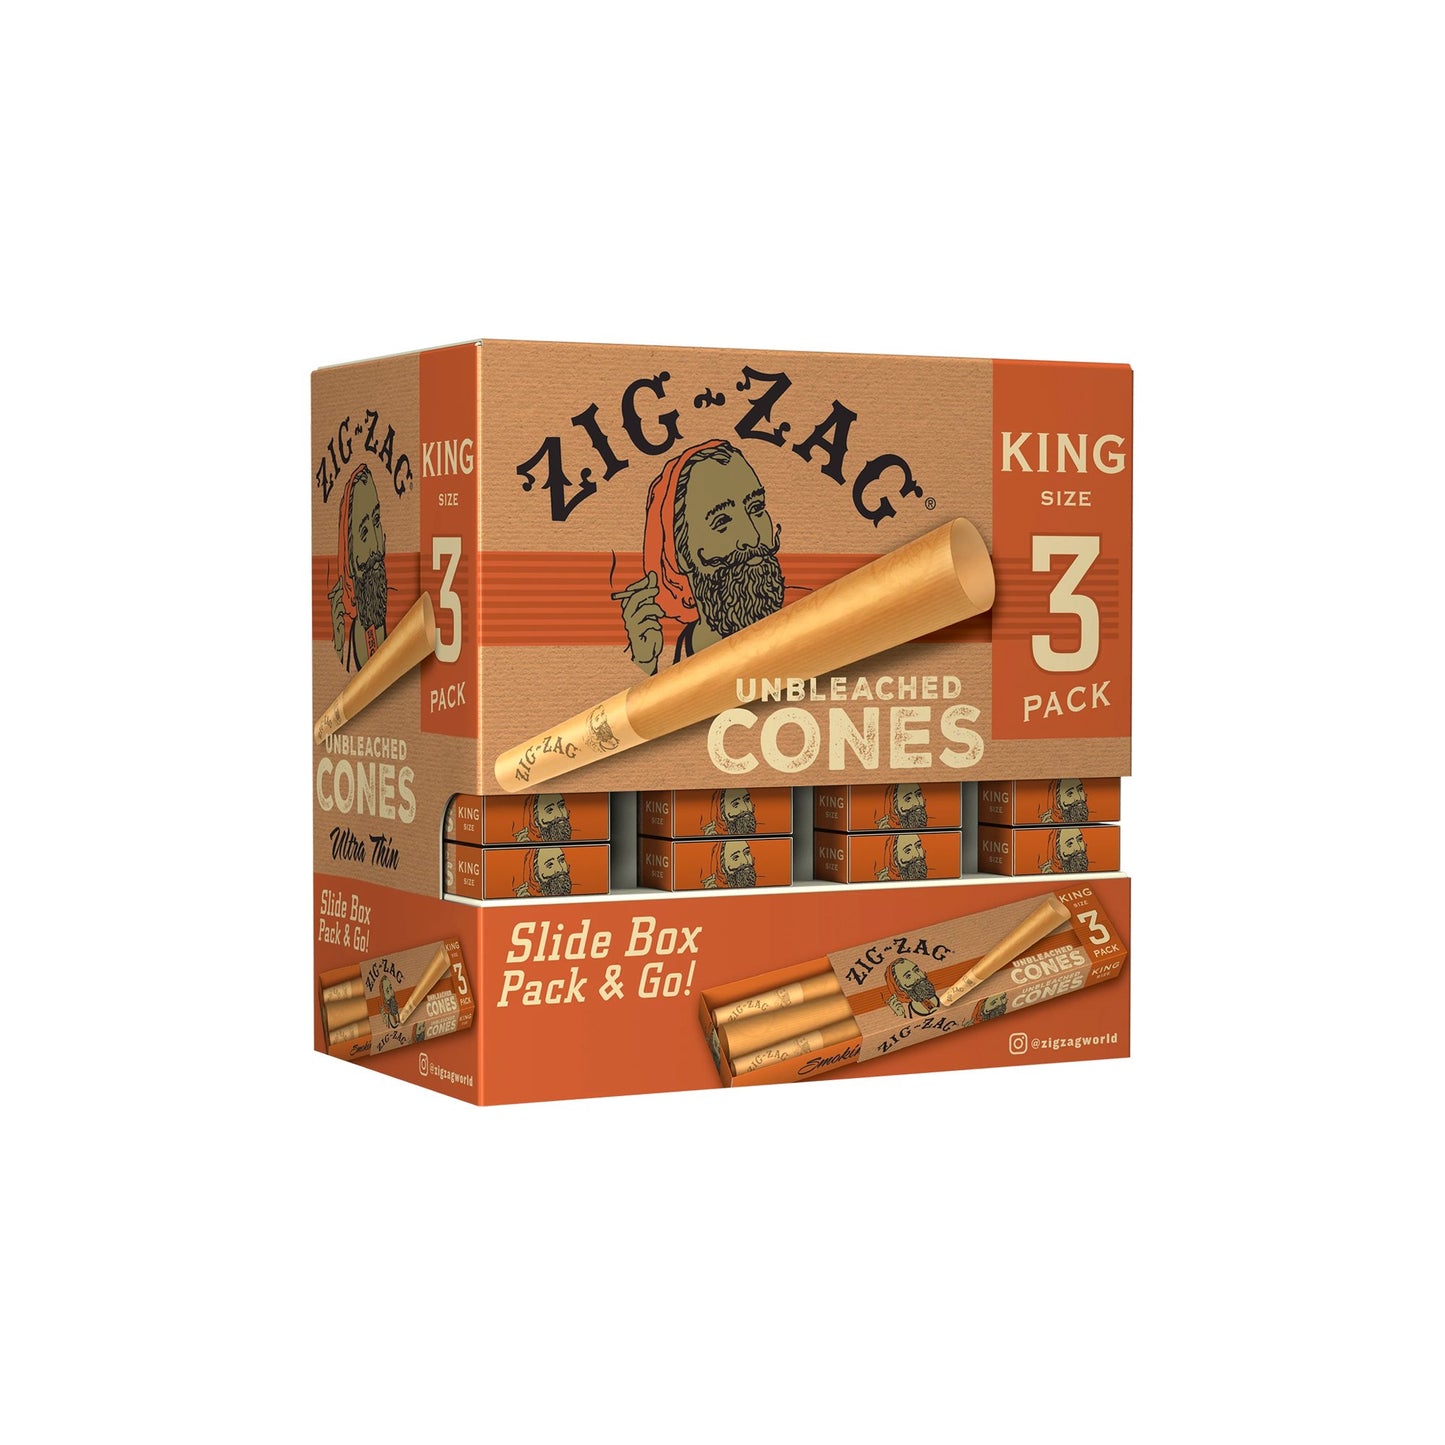 ZIG ZAG Unbleached Paper Cones 36ct Slide Box in 1-1/4" and King Size